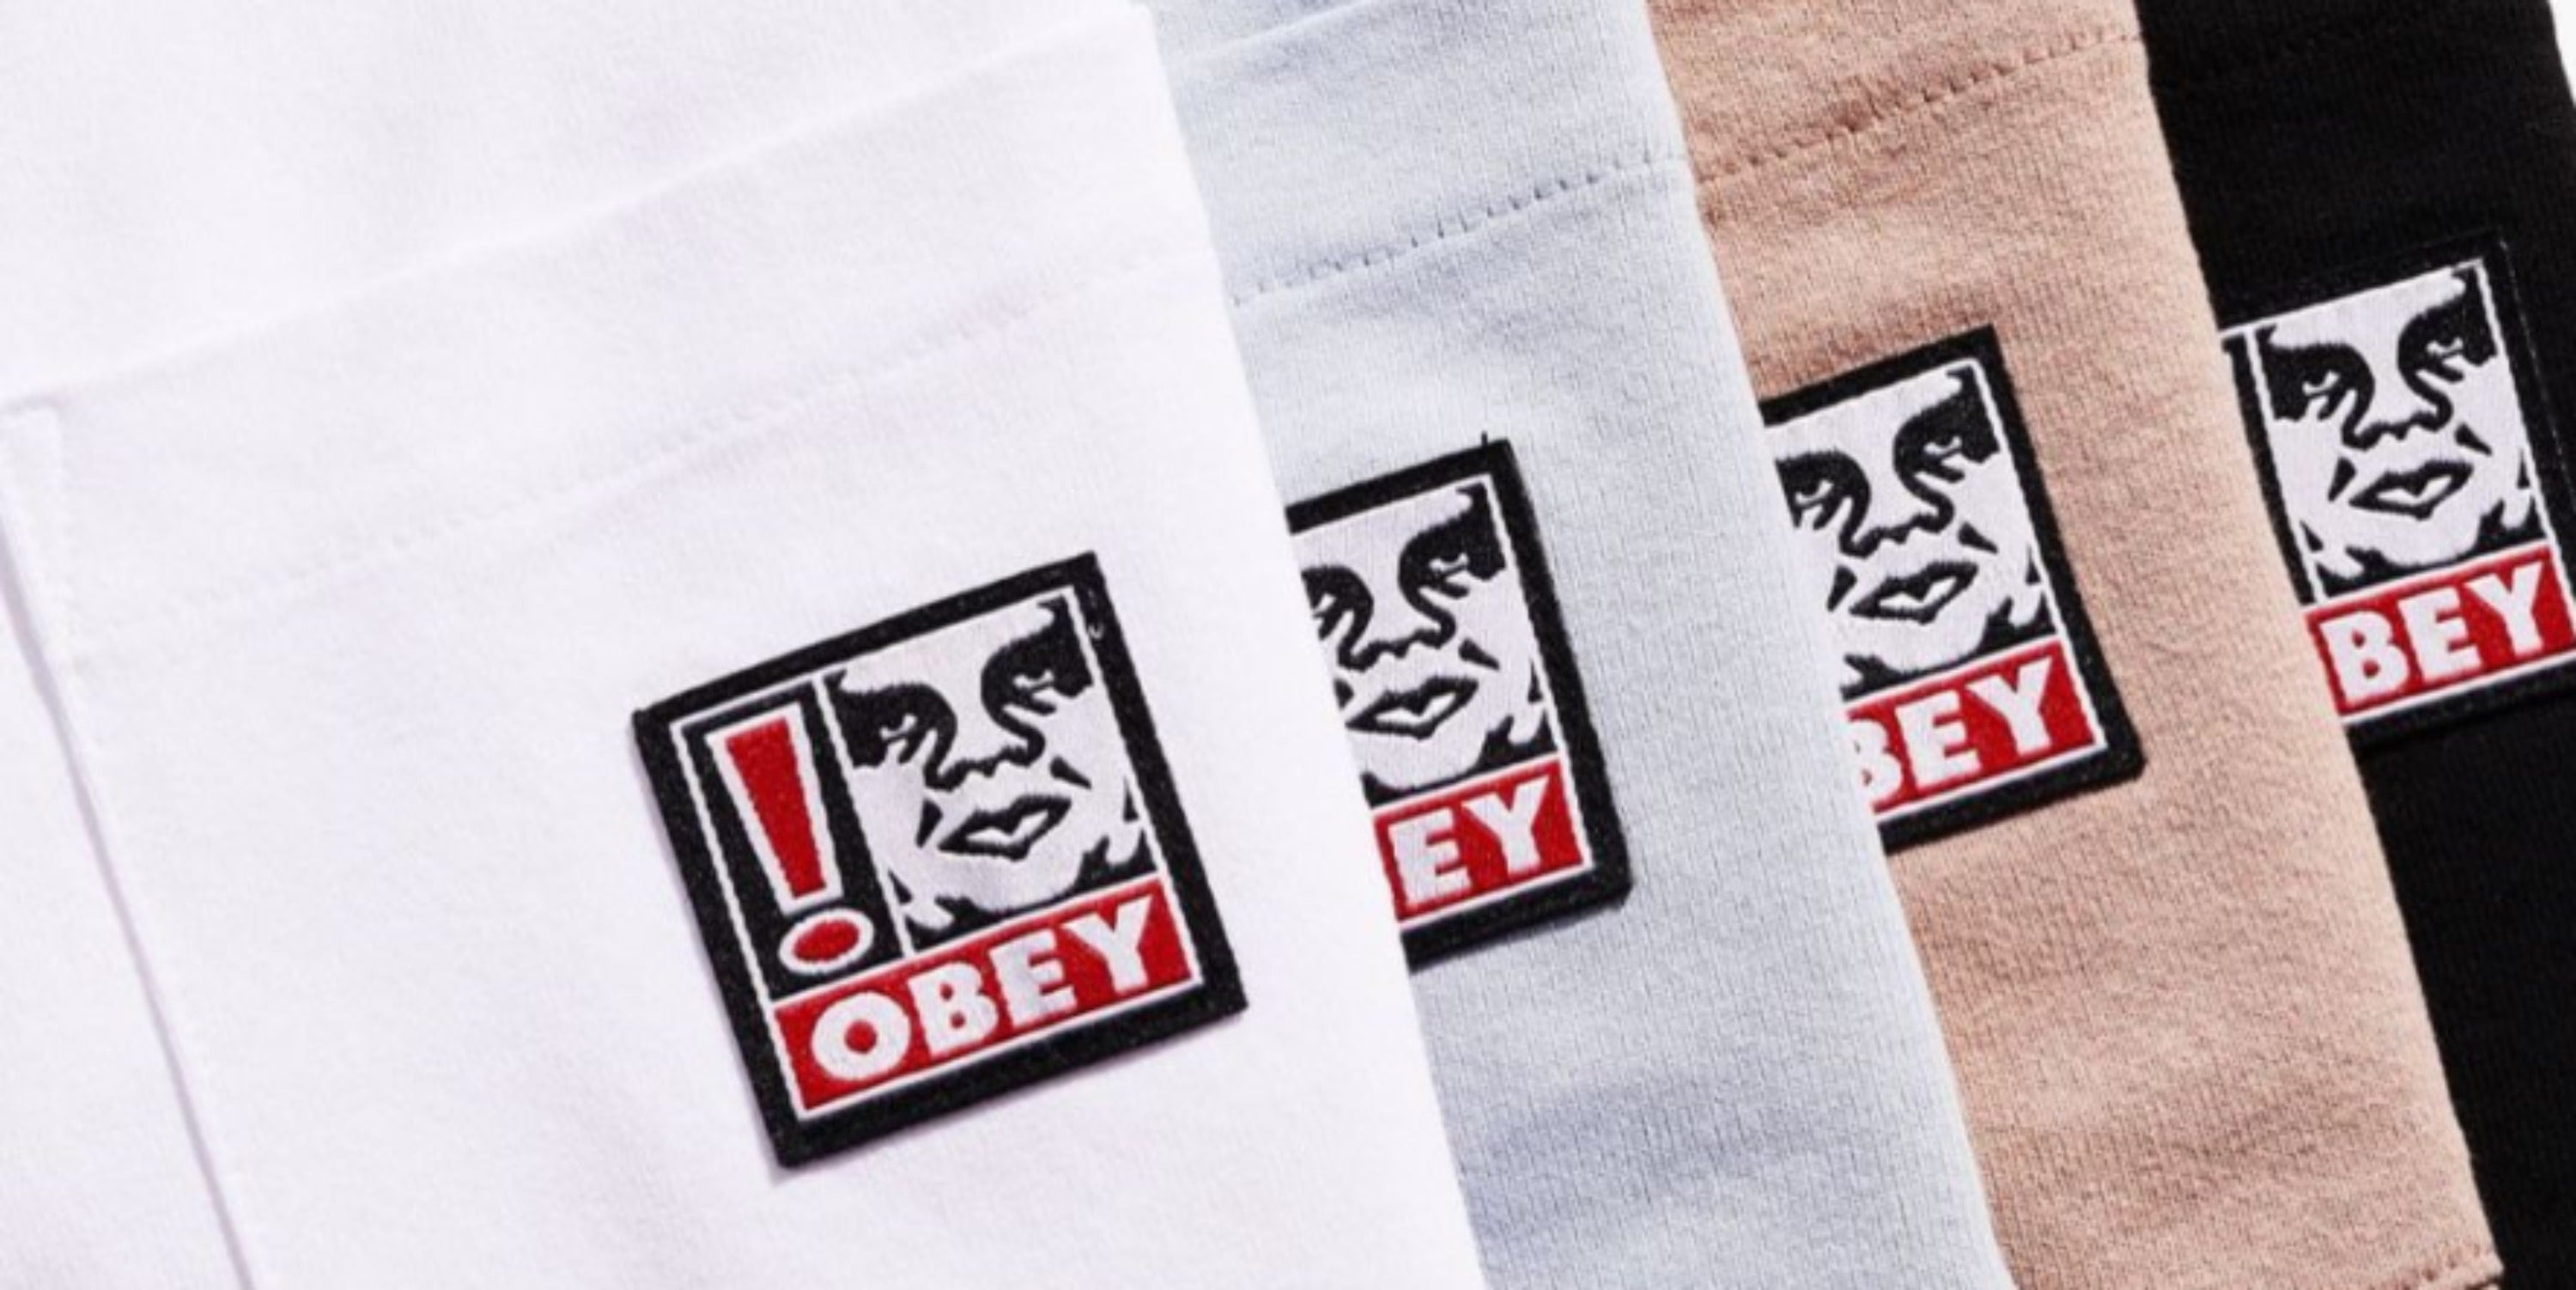 Obey Tee Shirts | Obey Shorts | Obey Dresses | Obey Tops | More